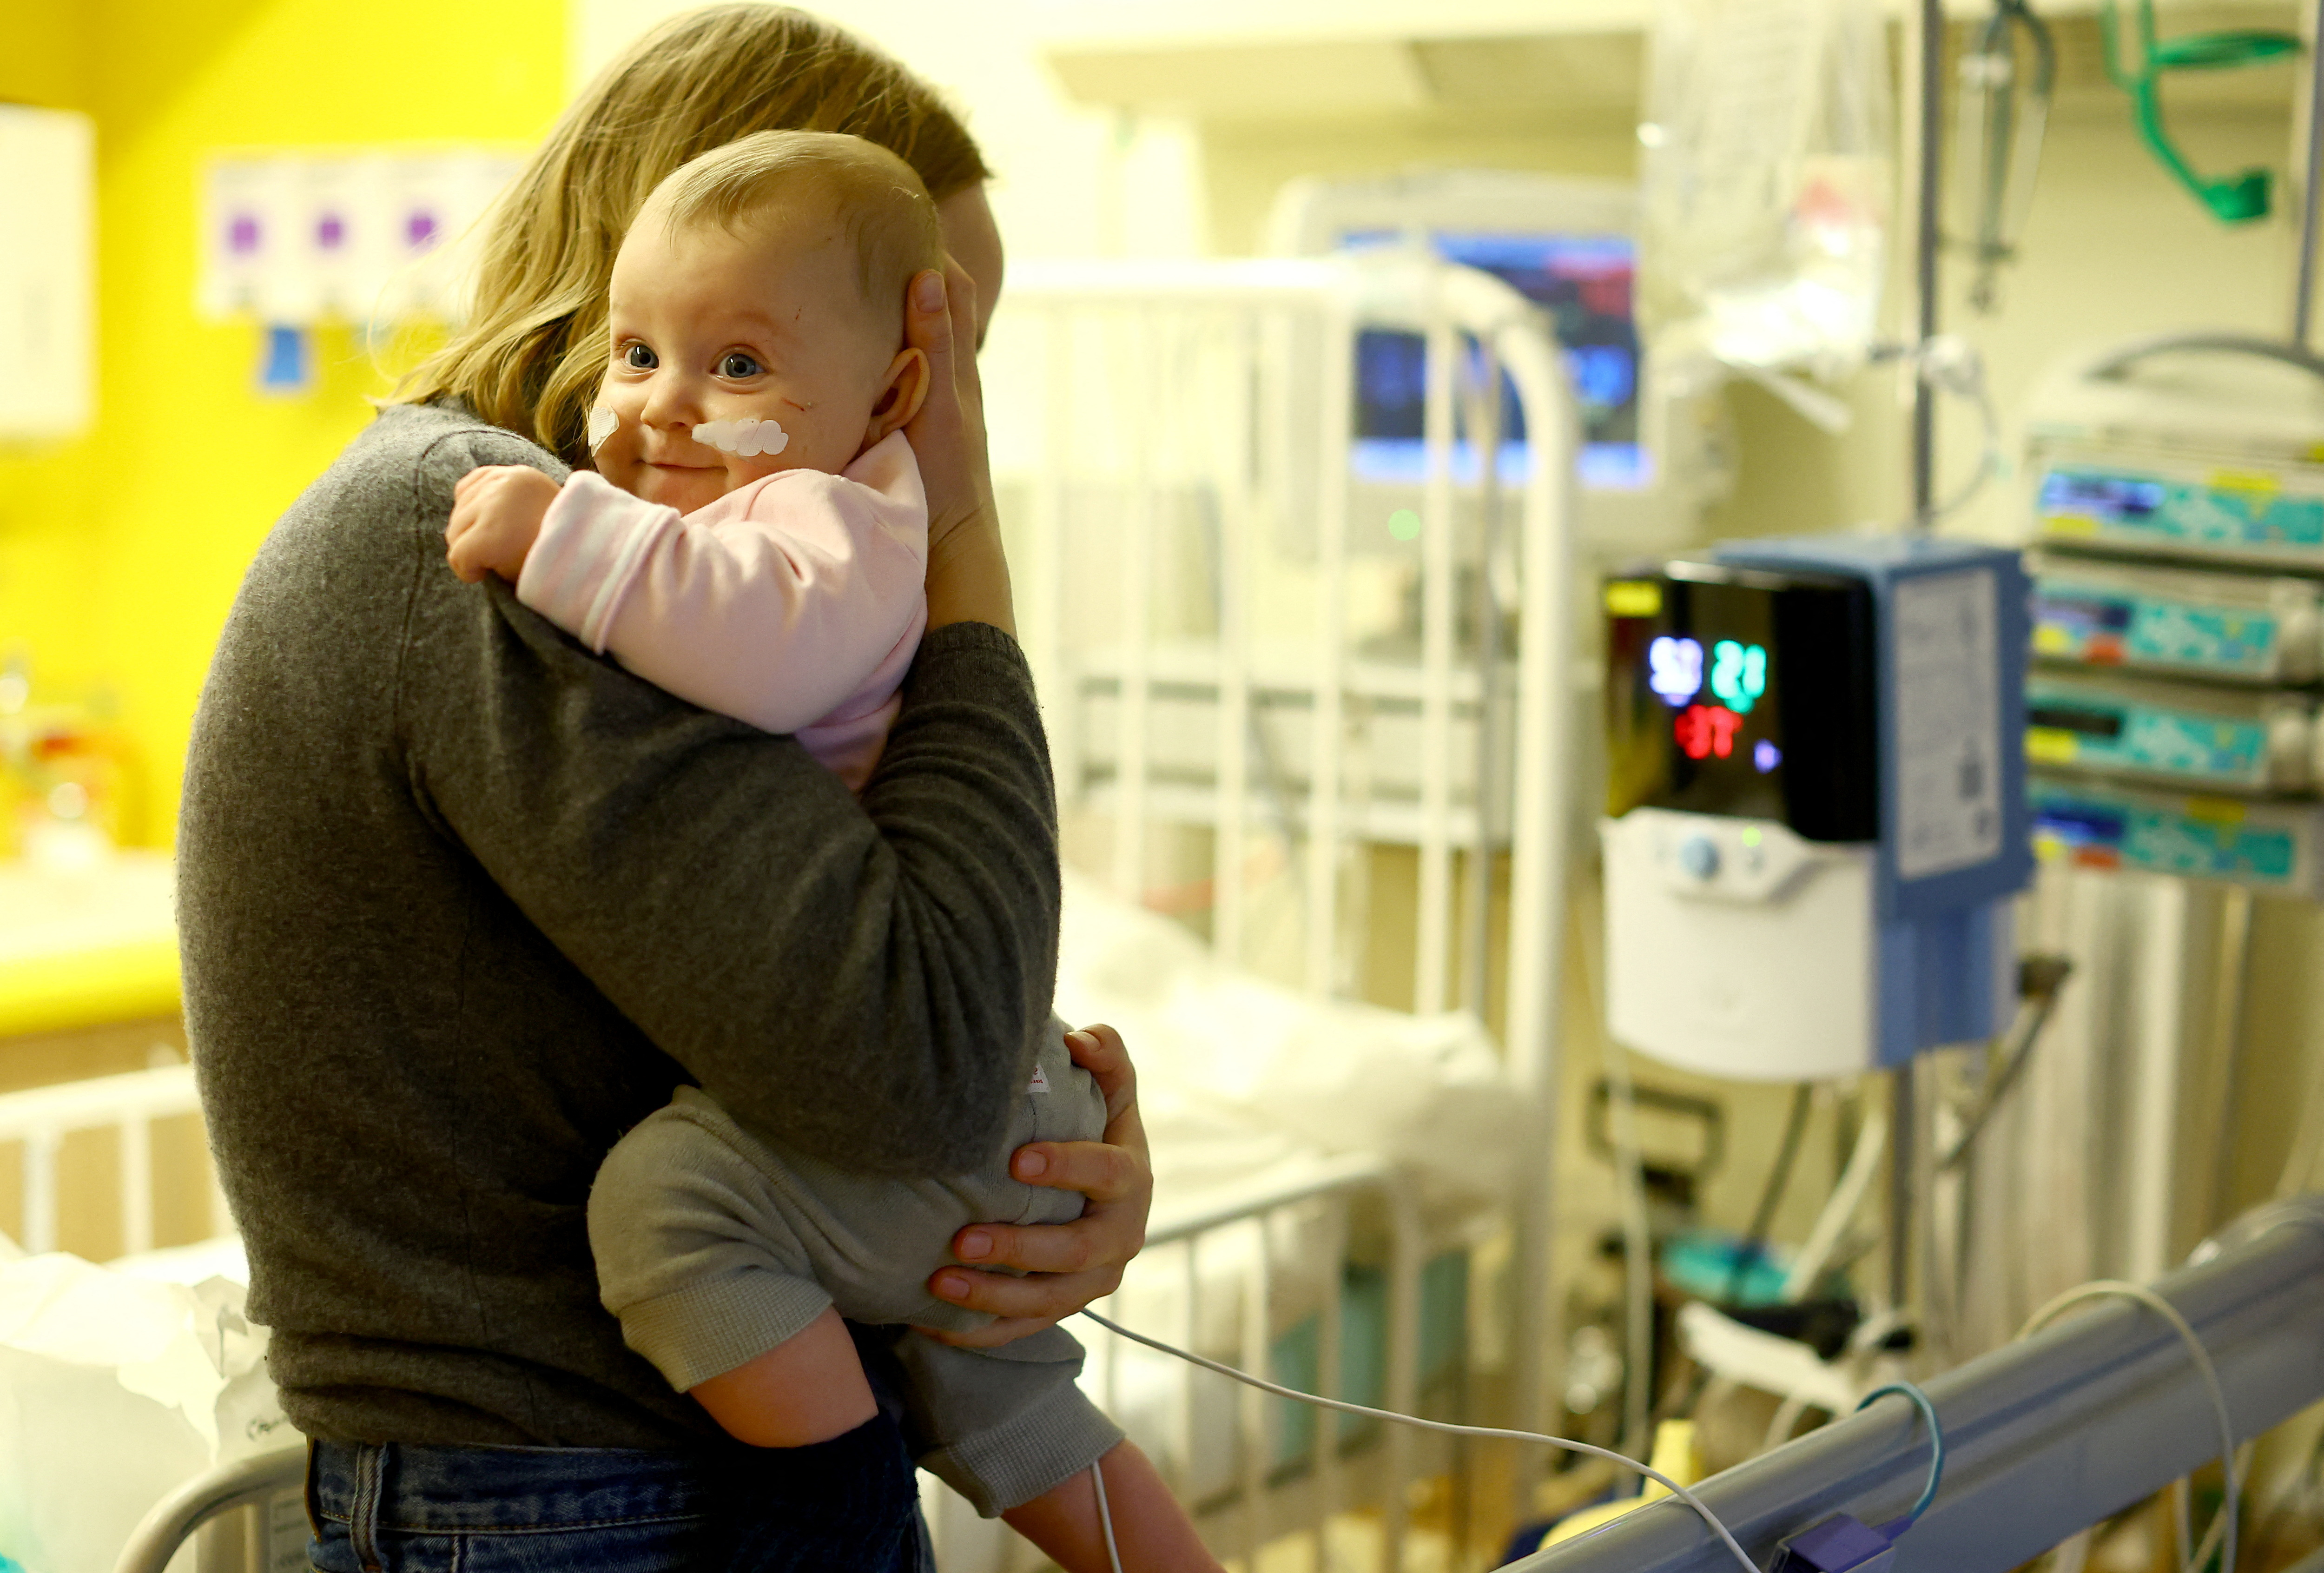 The bronchiolitis season has come early and consultations in health centers are multiplying.  Typically, the peak of cases occurs during June, but infections grew significantly during May (REUTERS / Lisi Niesner)